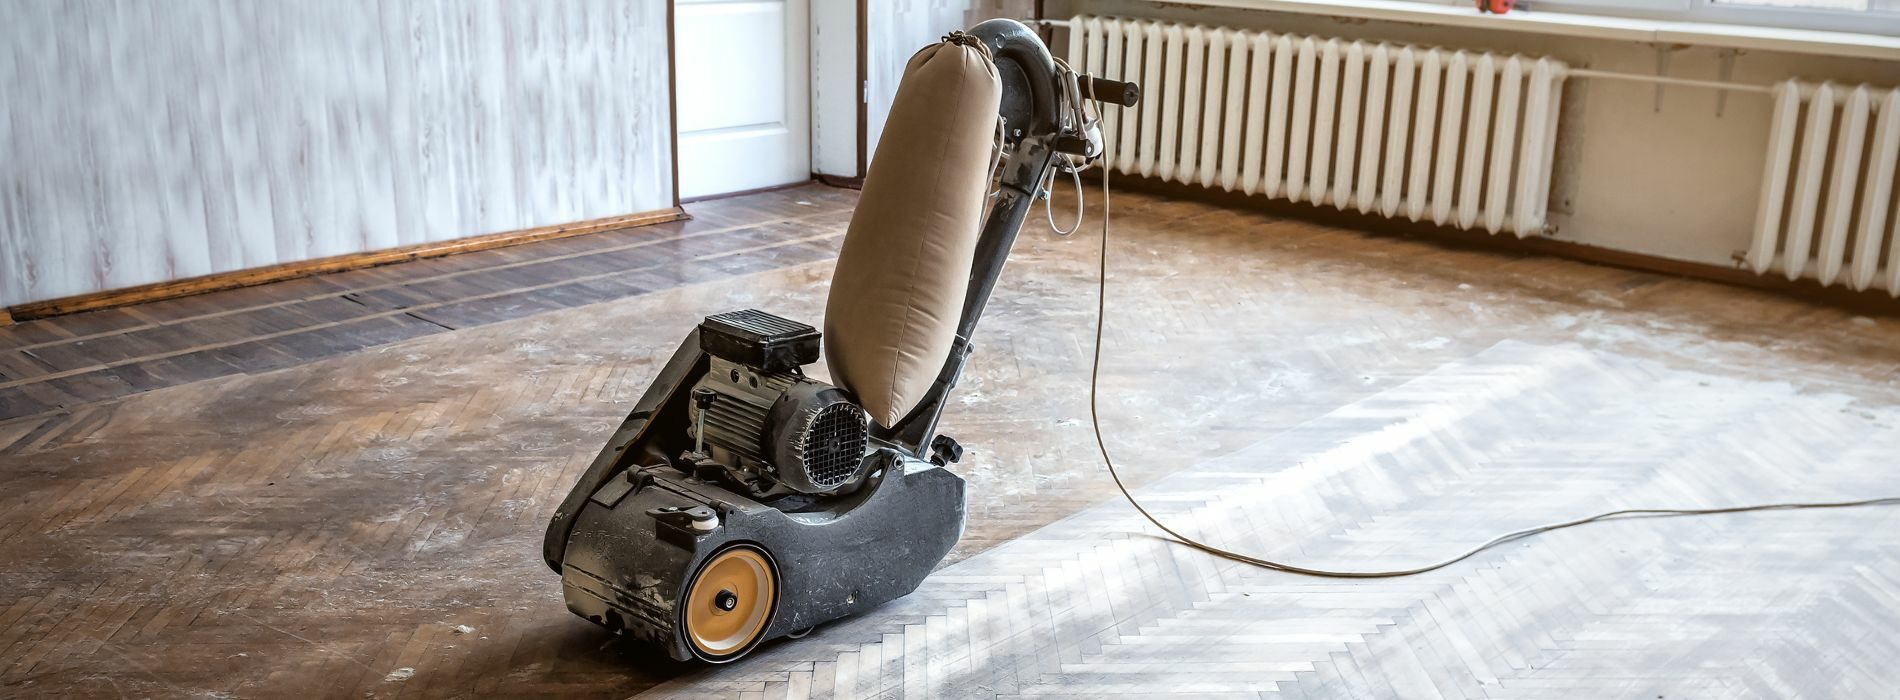 Image of a reliable and safe drum sander designed for sanding hardwood floors. The drum sander features a power output of 1.5 kW and has a dimension of 200 mm. It operates at 240 volts and 50 Hz, ensuring efficient performance and compatibility with standard power supplies.